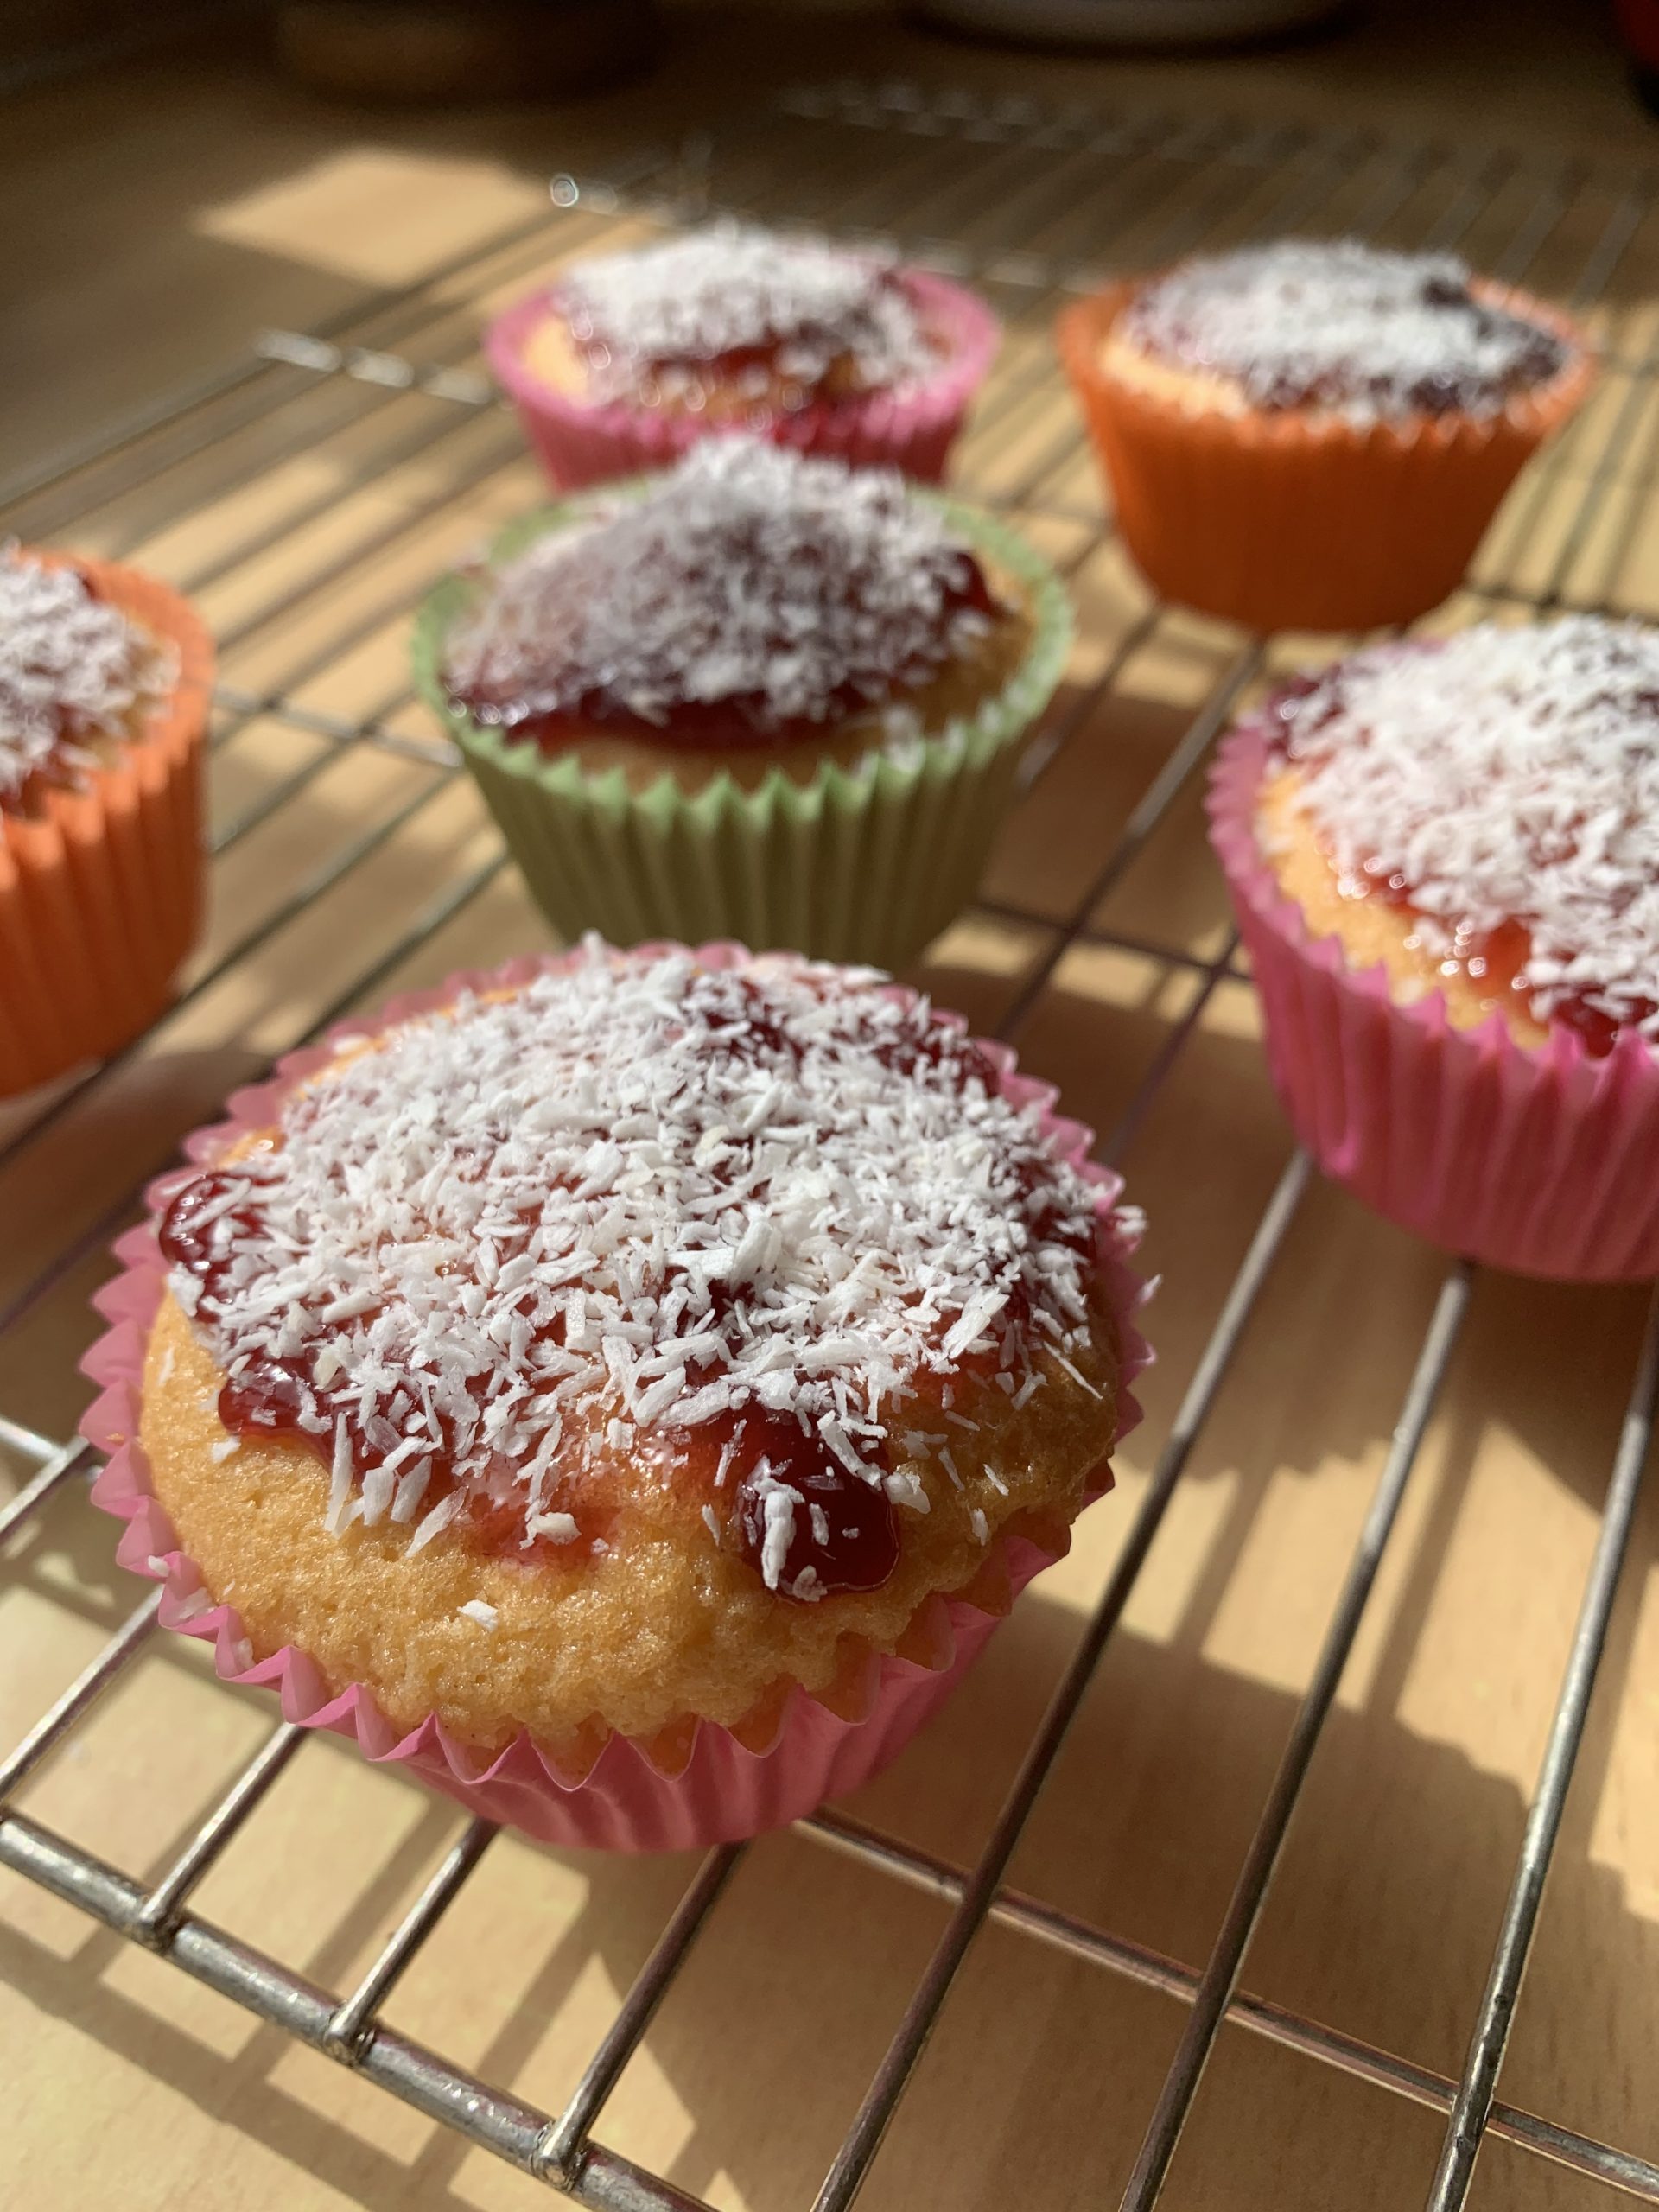 Traditional school jam and coconut cupcakes